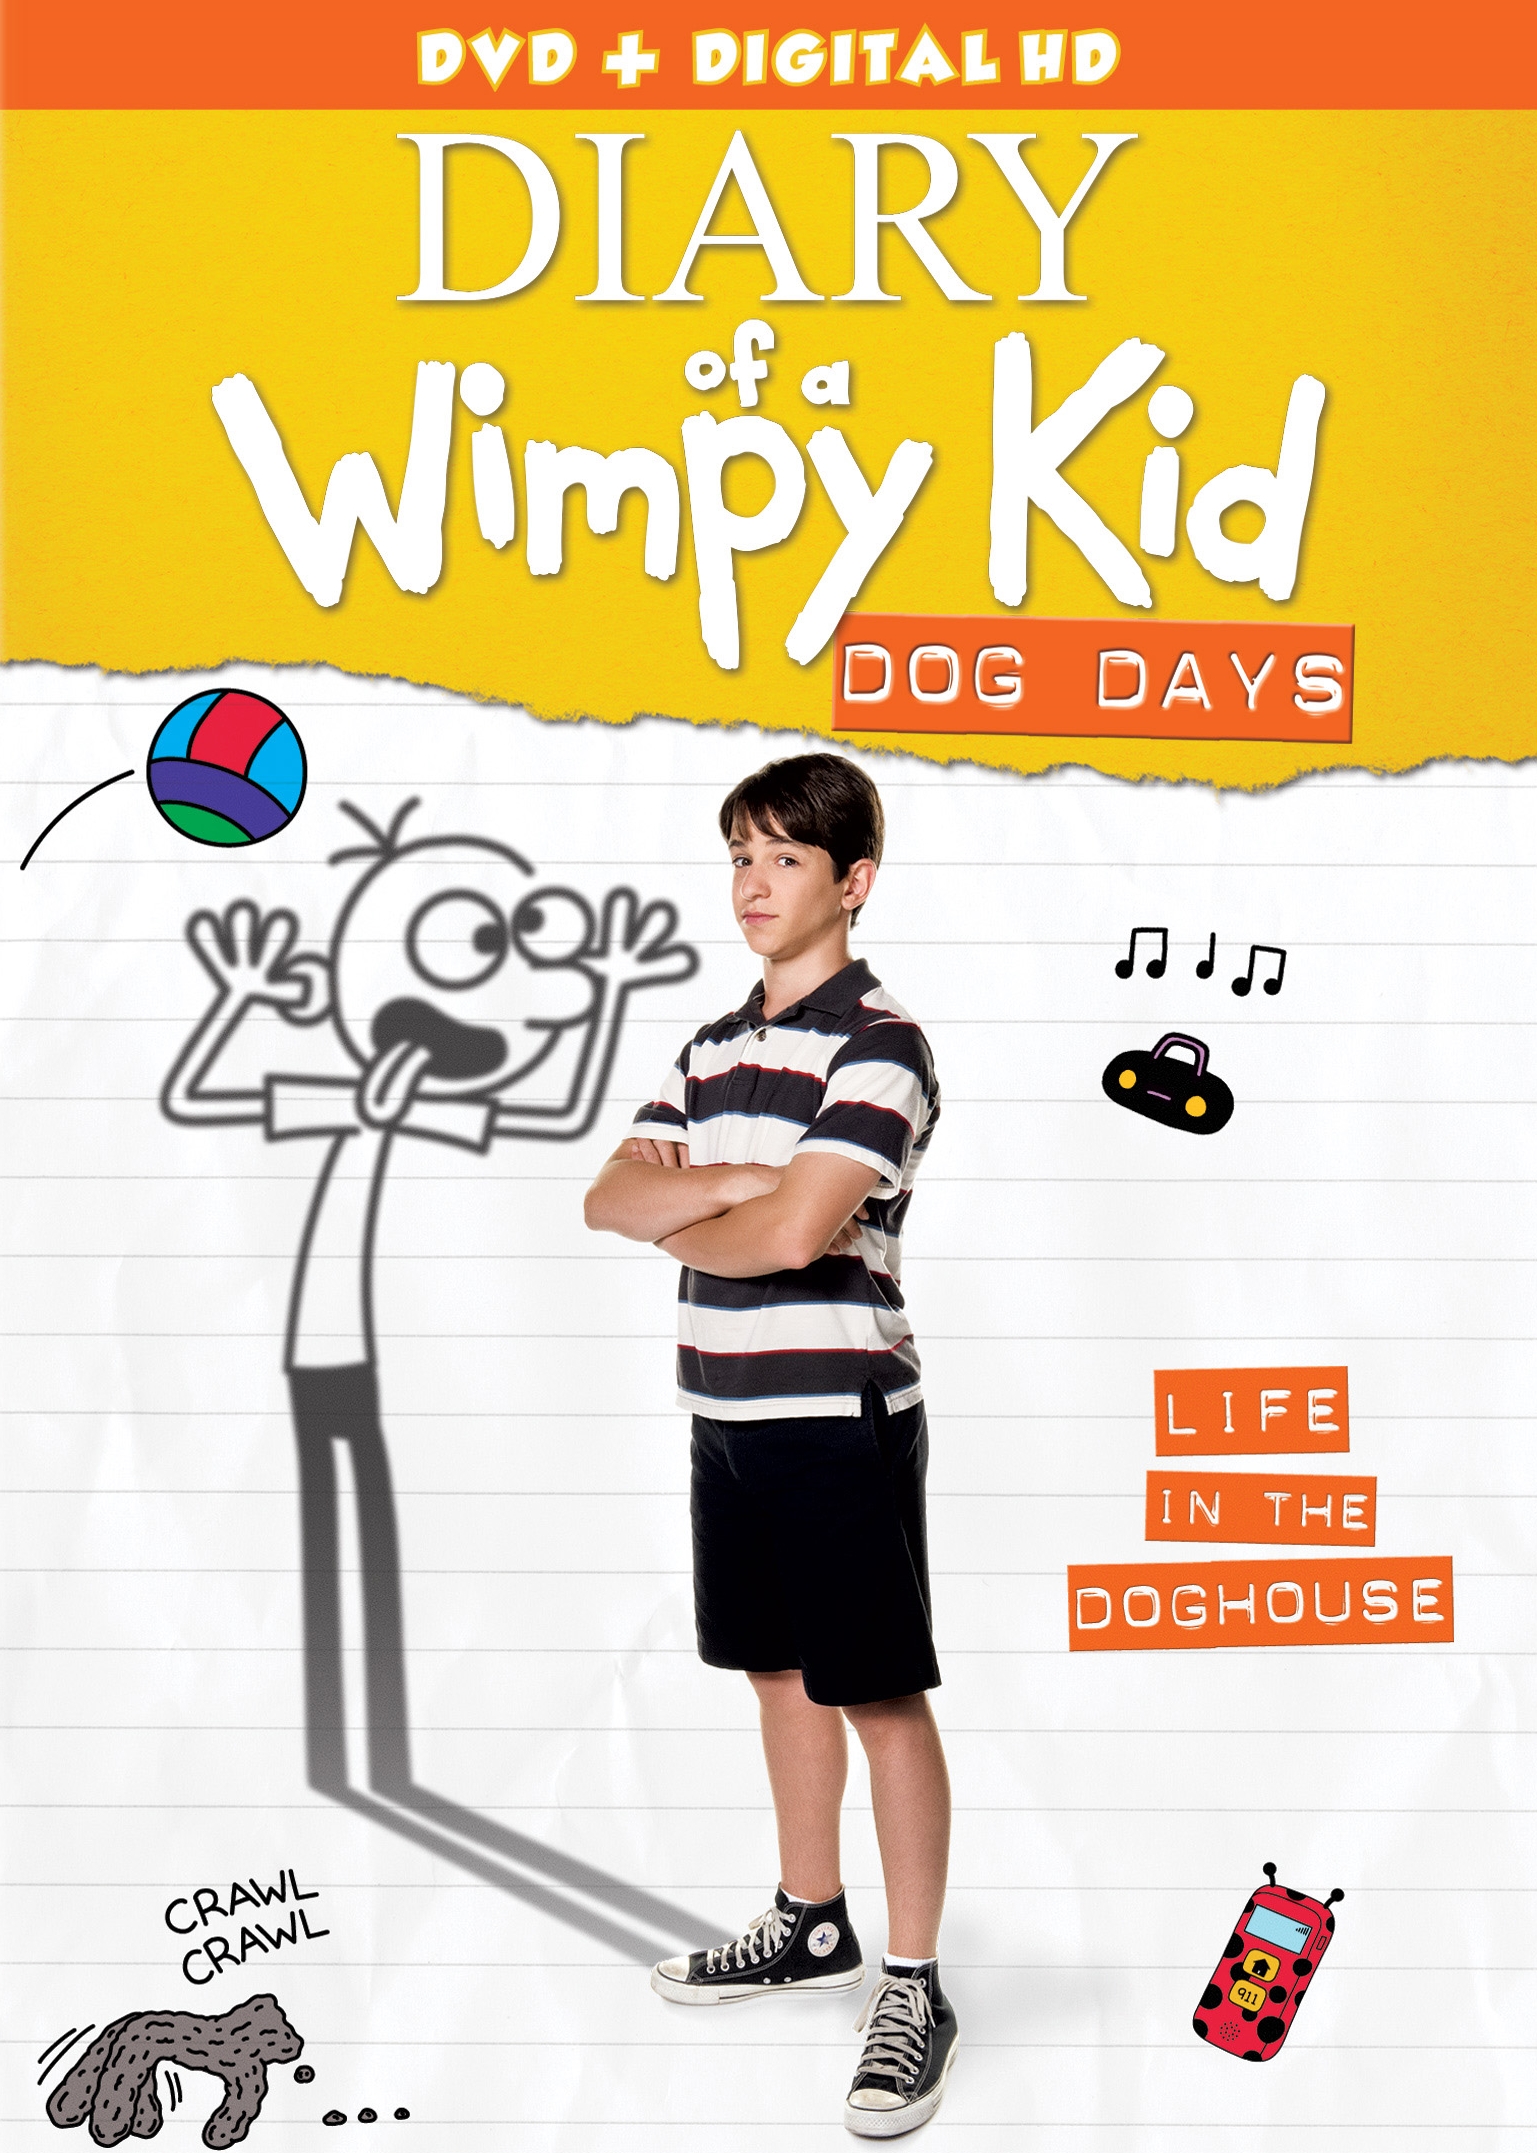 Best Buy: Diary of a Wimpy Kid: Rodrick Rules [DVD] [2011]